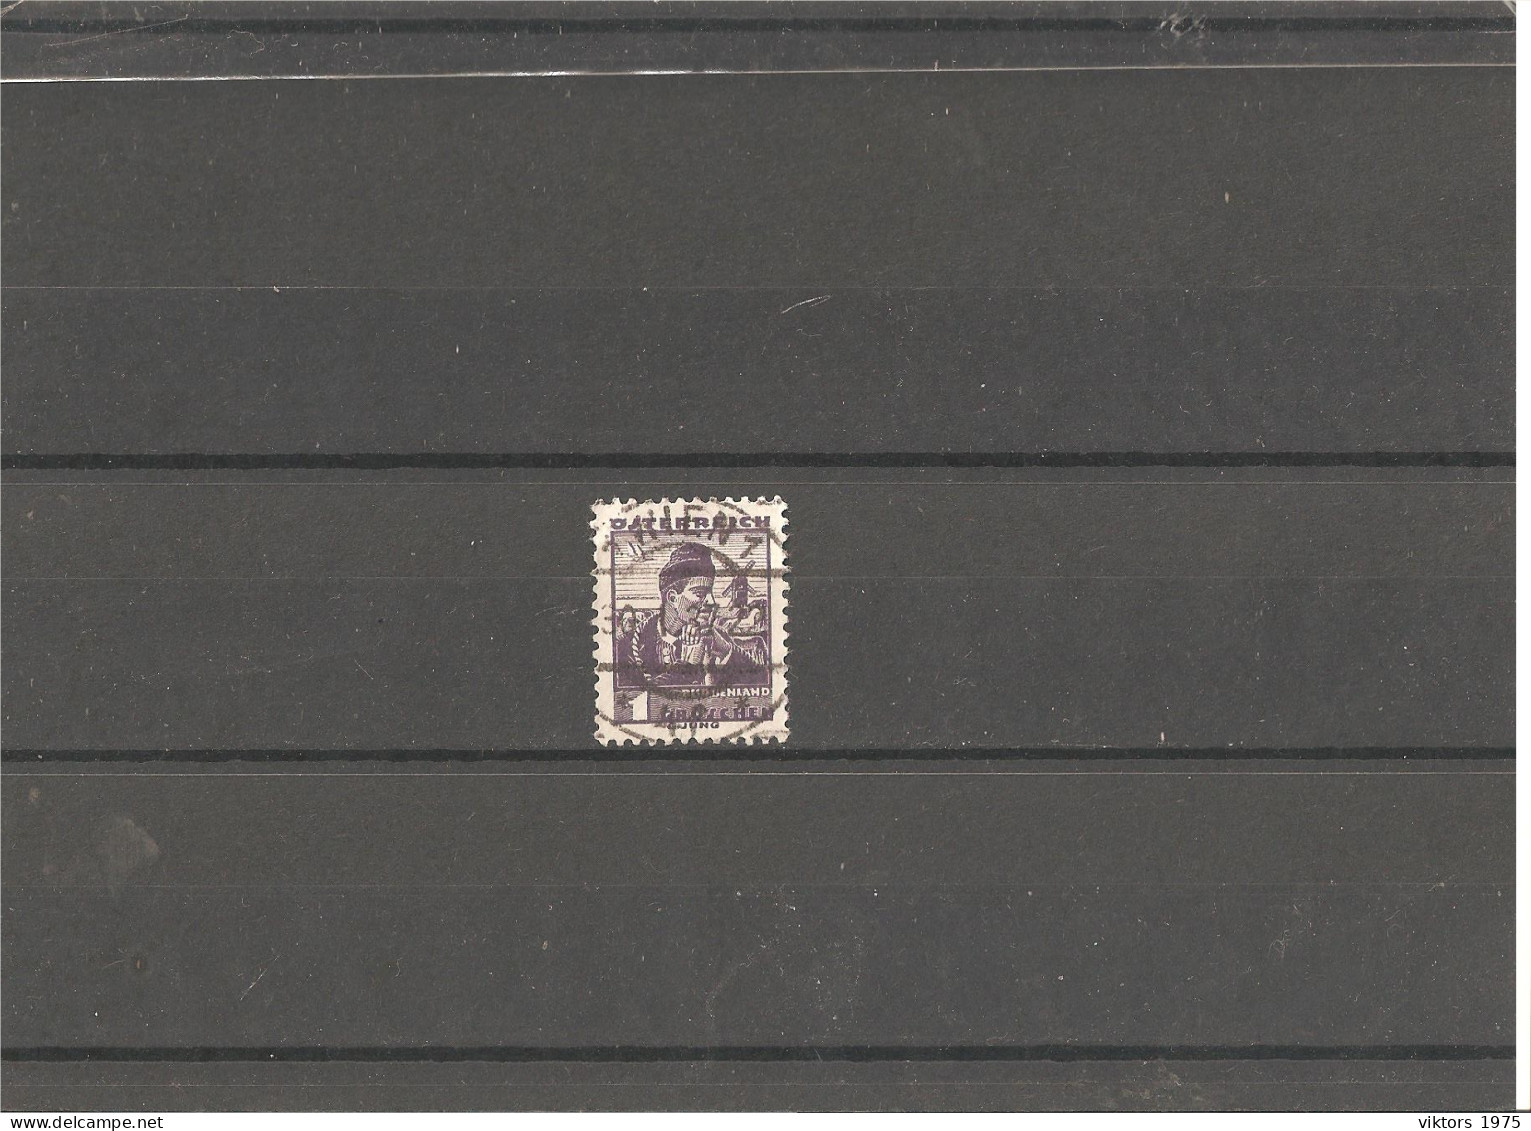 Used Stamp Nr.567 In MICHEL Catalog - Used Stamps